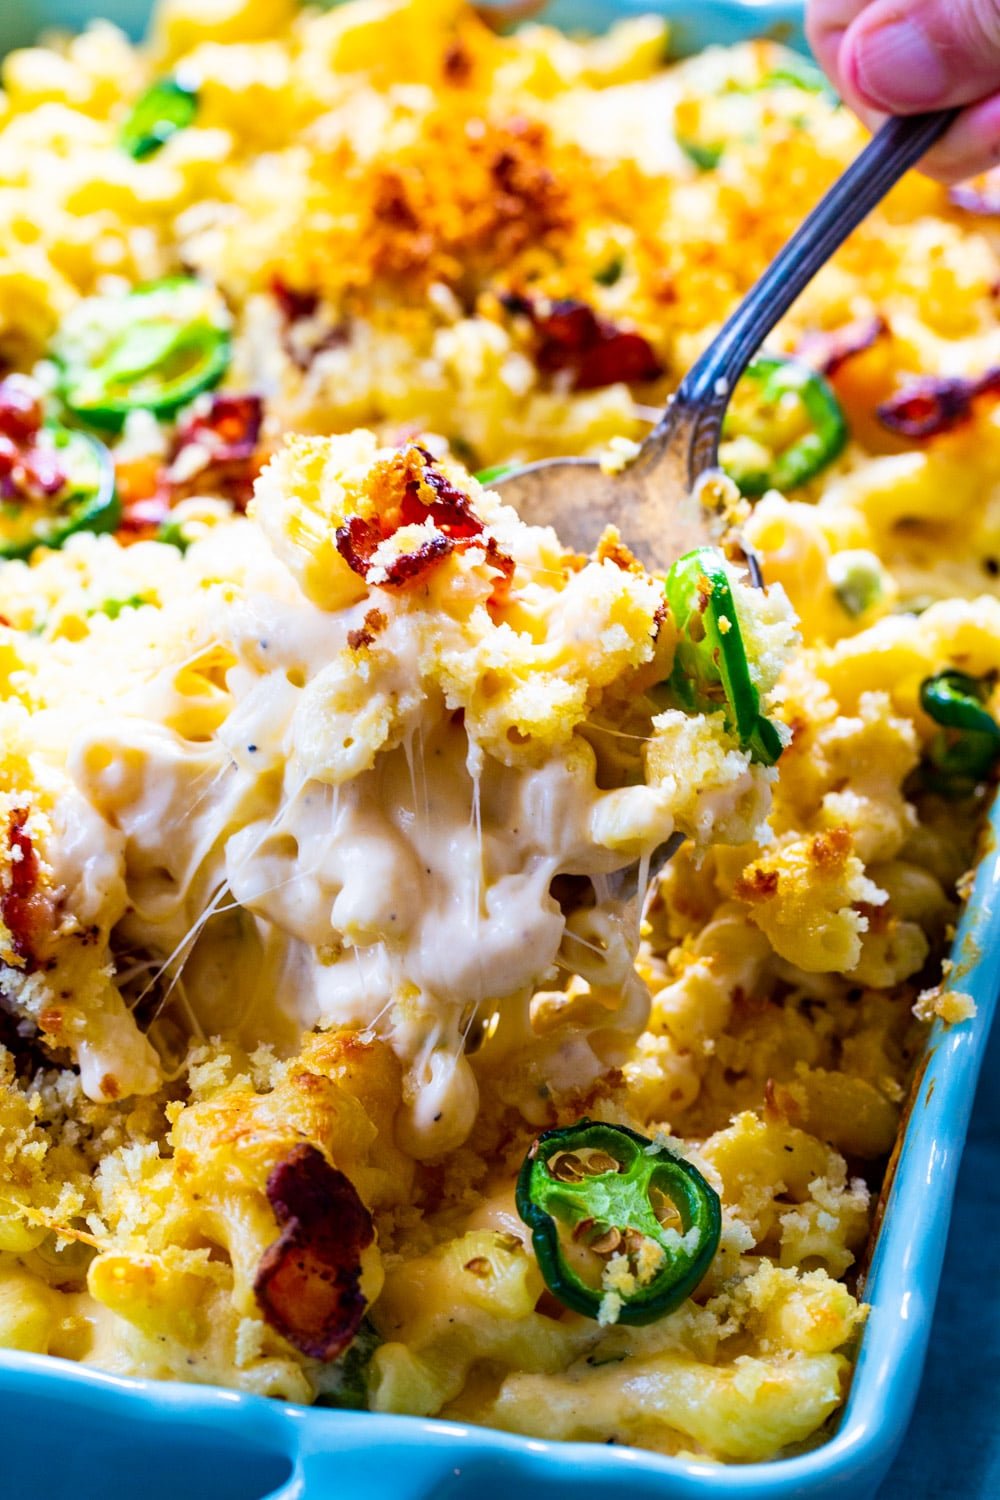 Spoon scooping Jalapeno Popper Mac and Cheese.